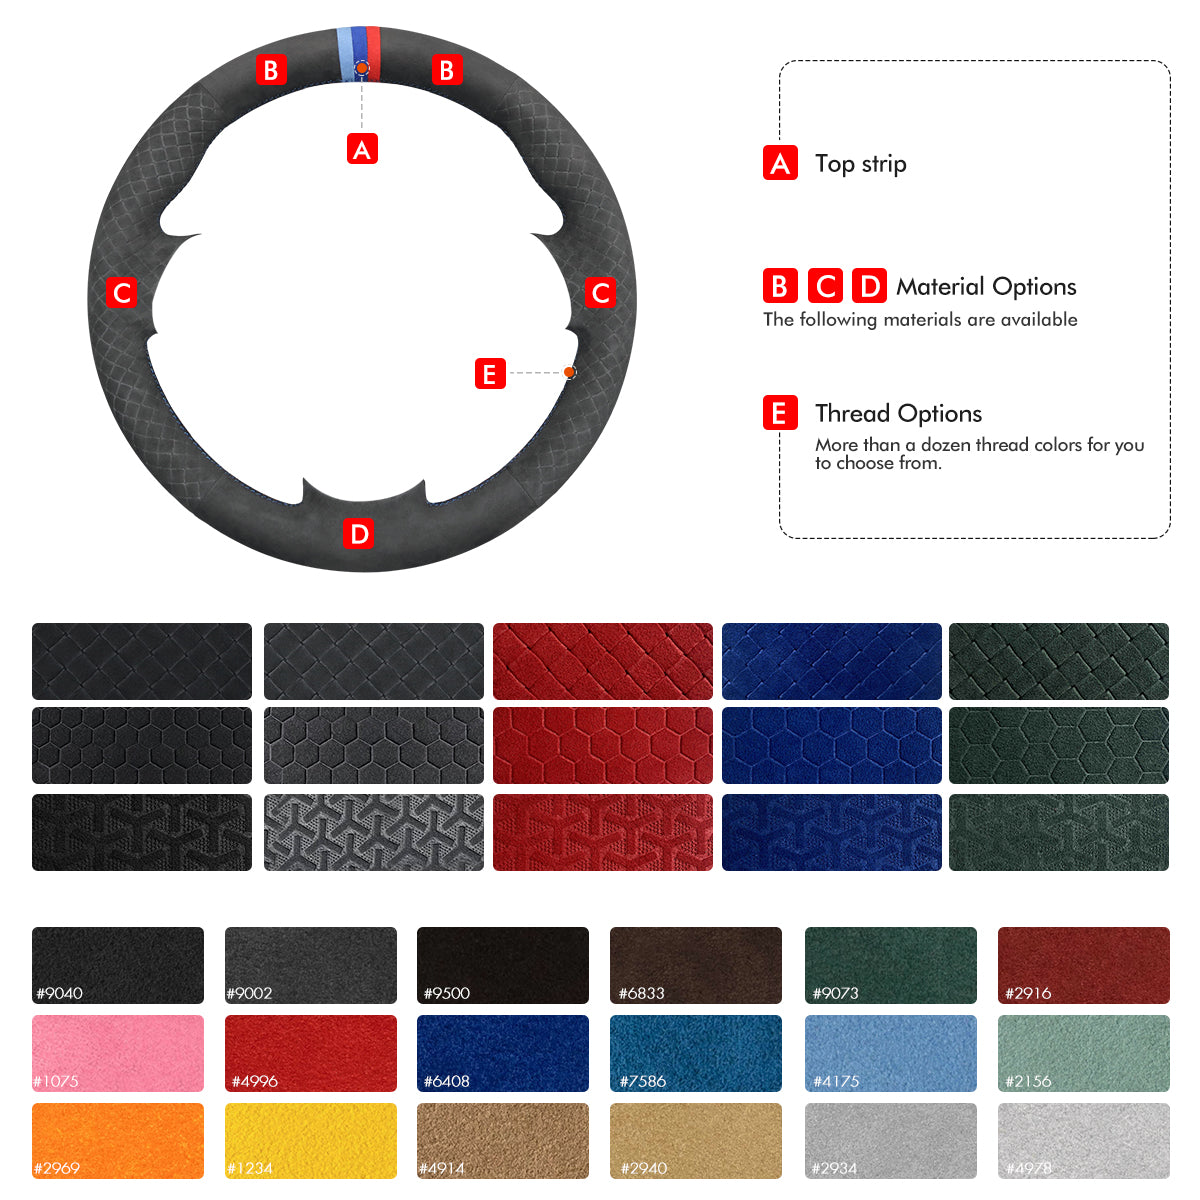 MEWANT Hand Stitch Car Steering Wheel Cover for BMW X5 E70 2007-2013